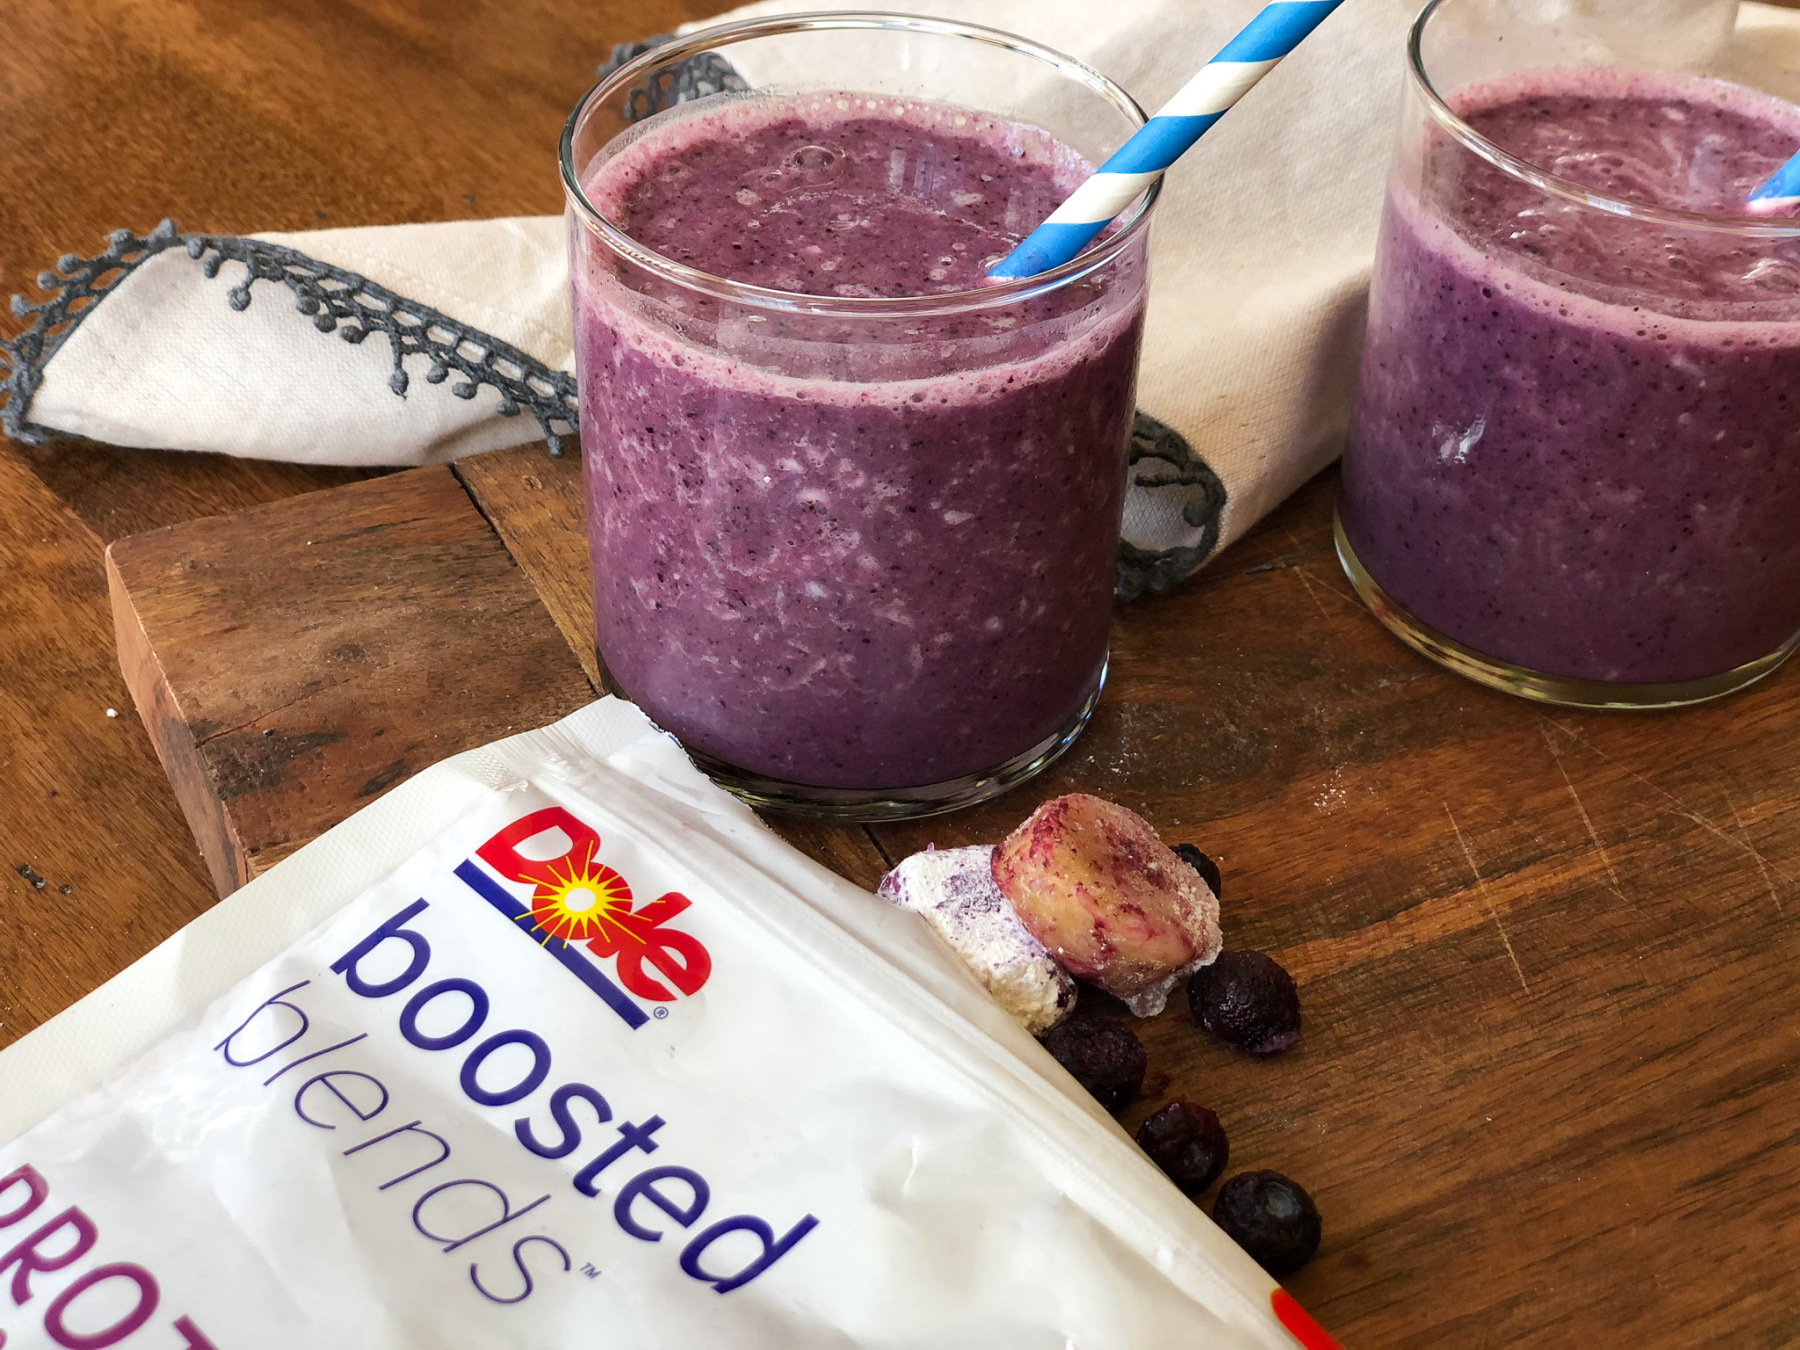 Find Delicious Dole Boosted Blends™ Smoothies With the Frozen Fruit at Publix on I Heart Publix 2